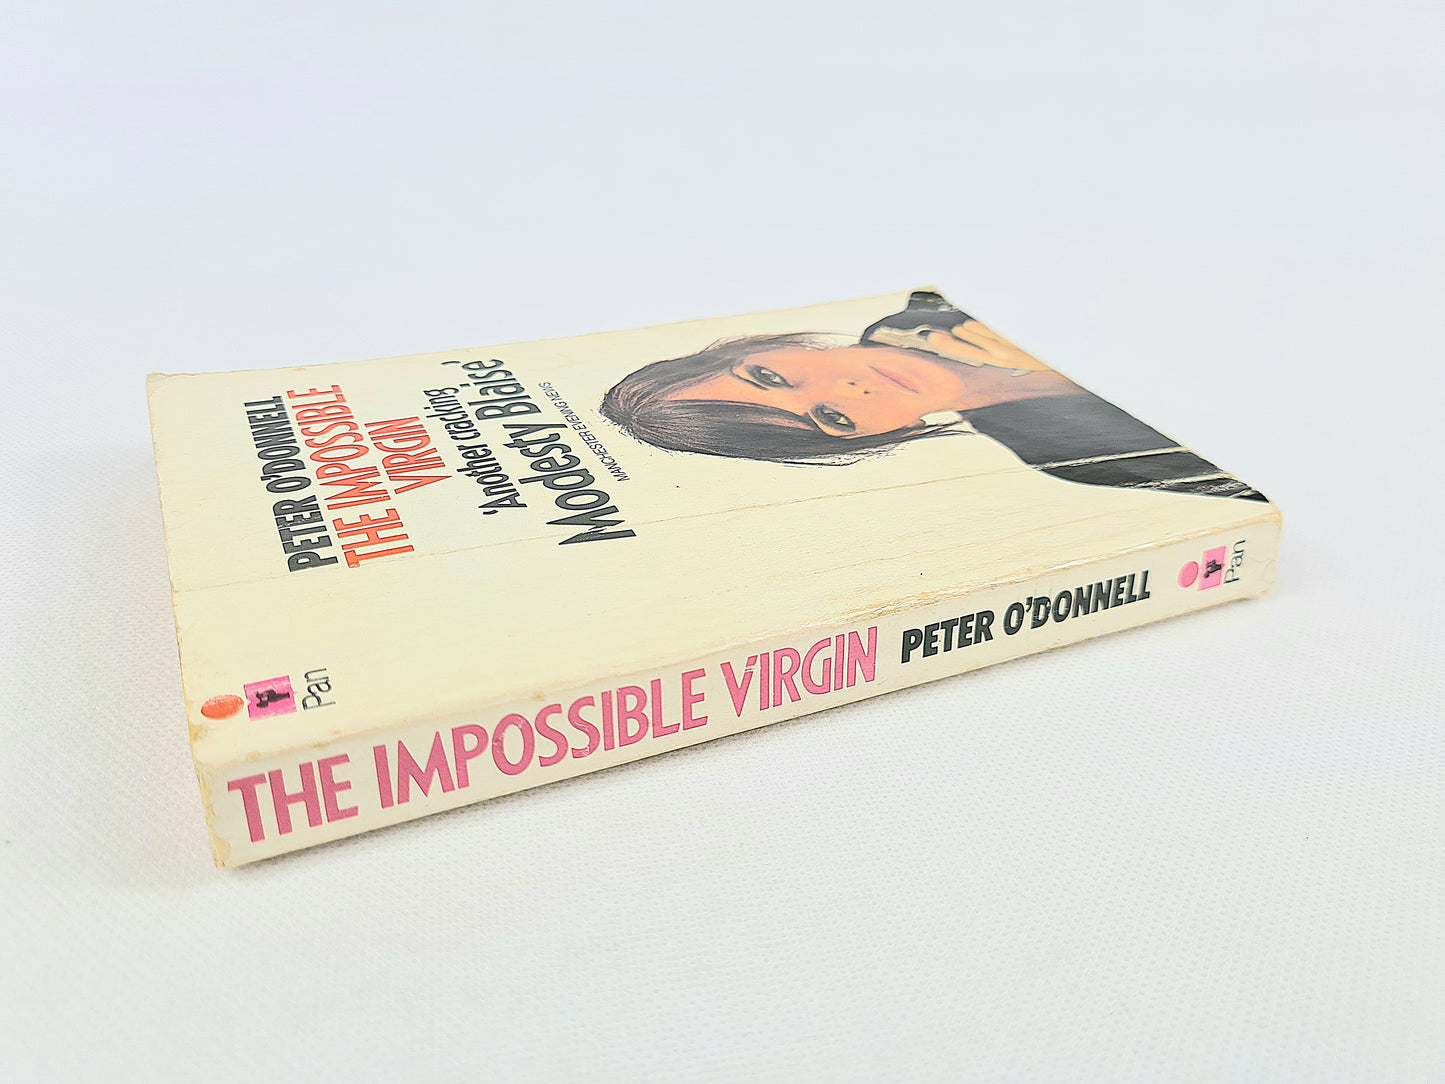 The Impossible Virgin by Peter O'Donnell. Vintage Pan book. Paperback